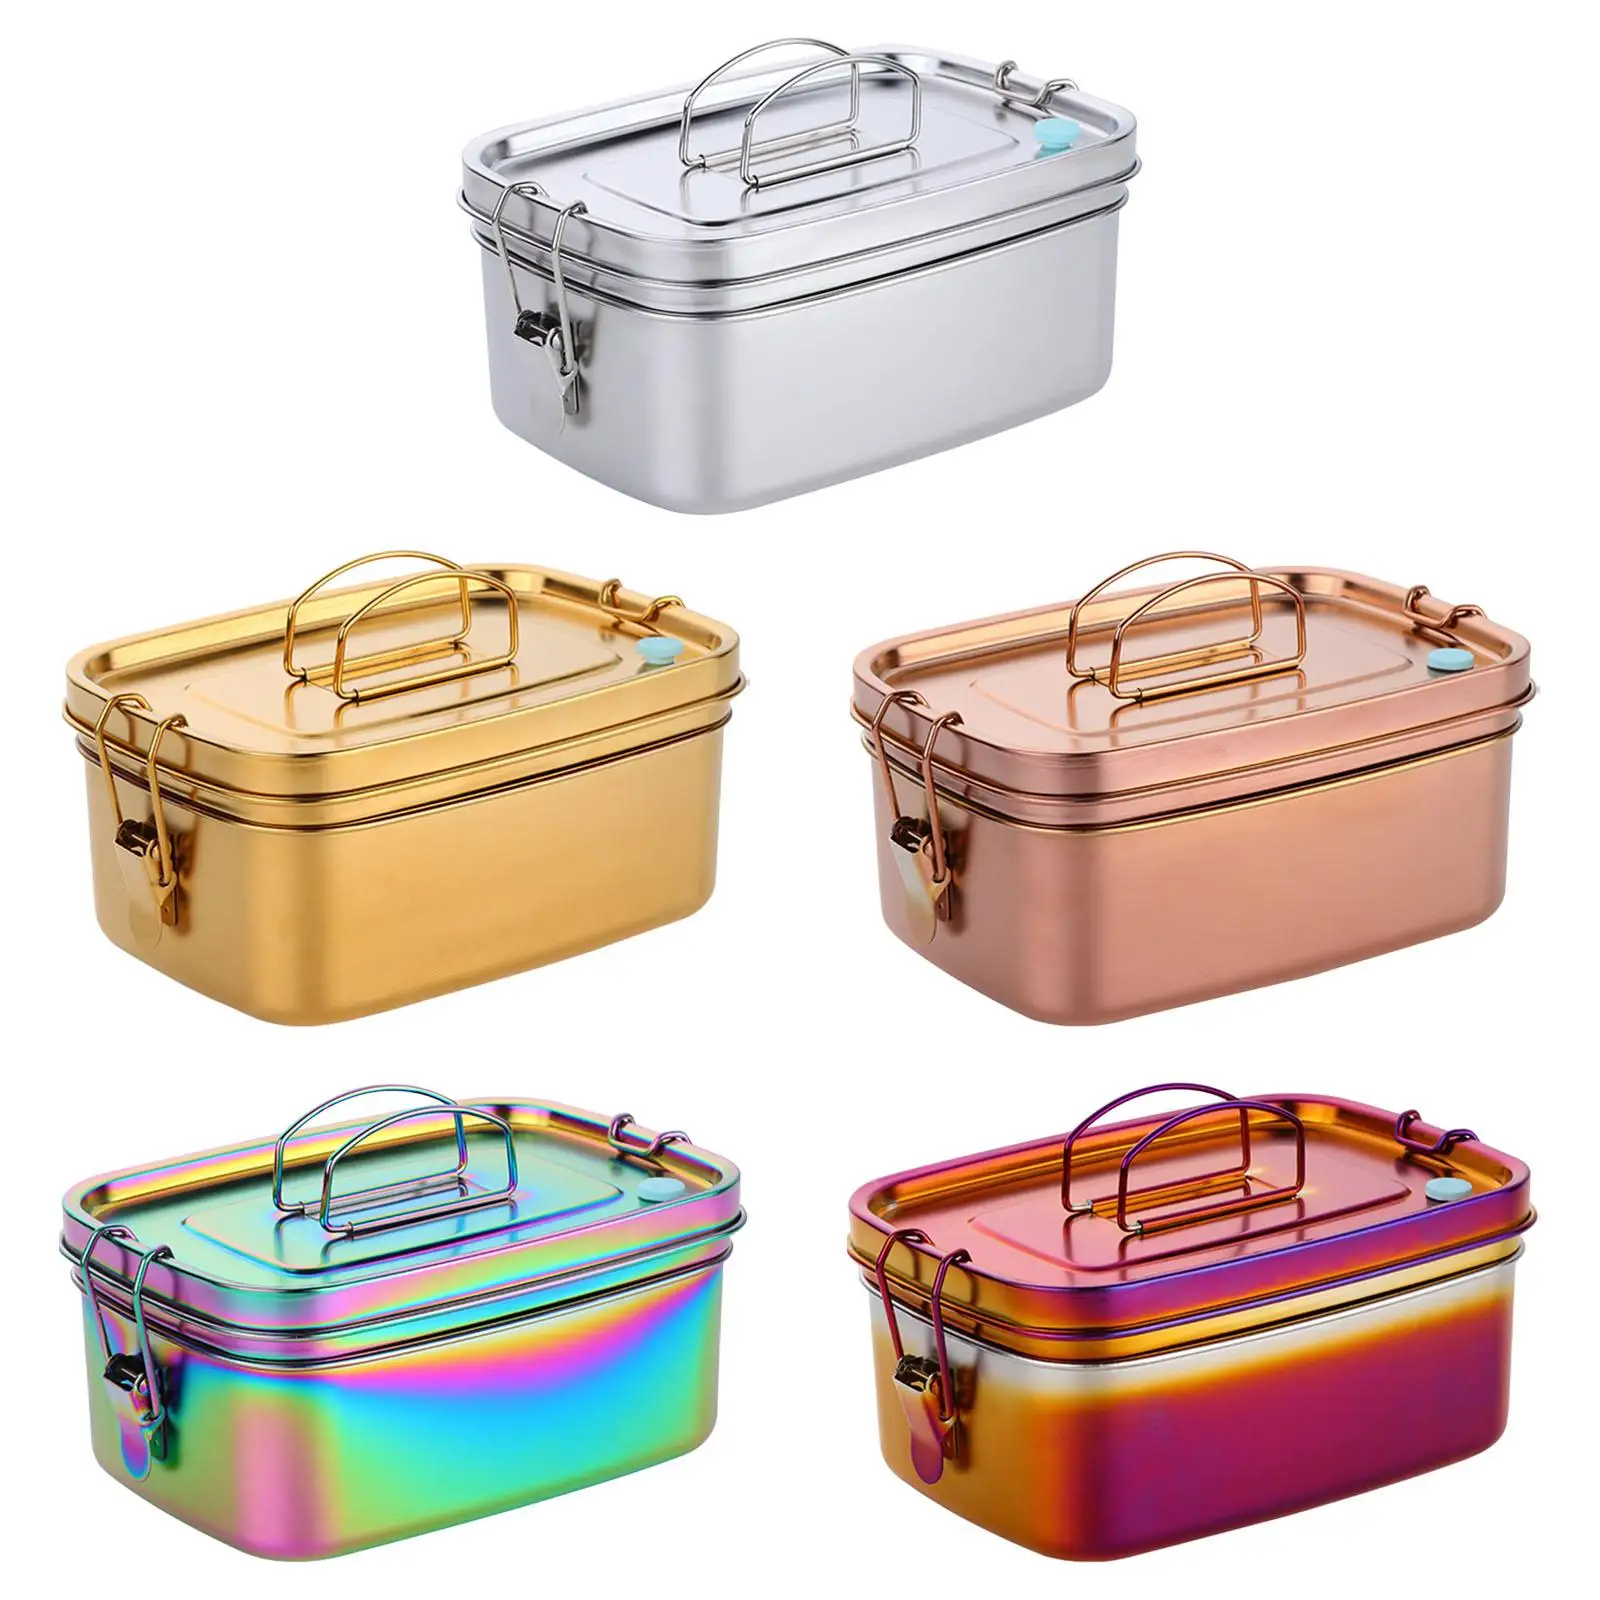 Bento Box Multifunctional Picnic Food Carrier Snack Box Divided Food Storage Containers for Office Camping School Home Hiking